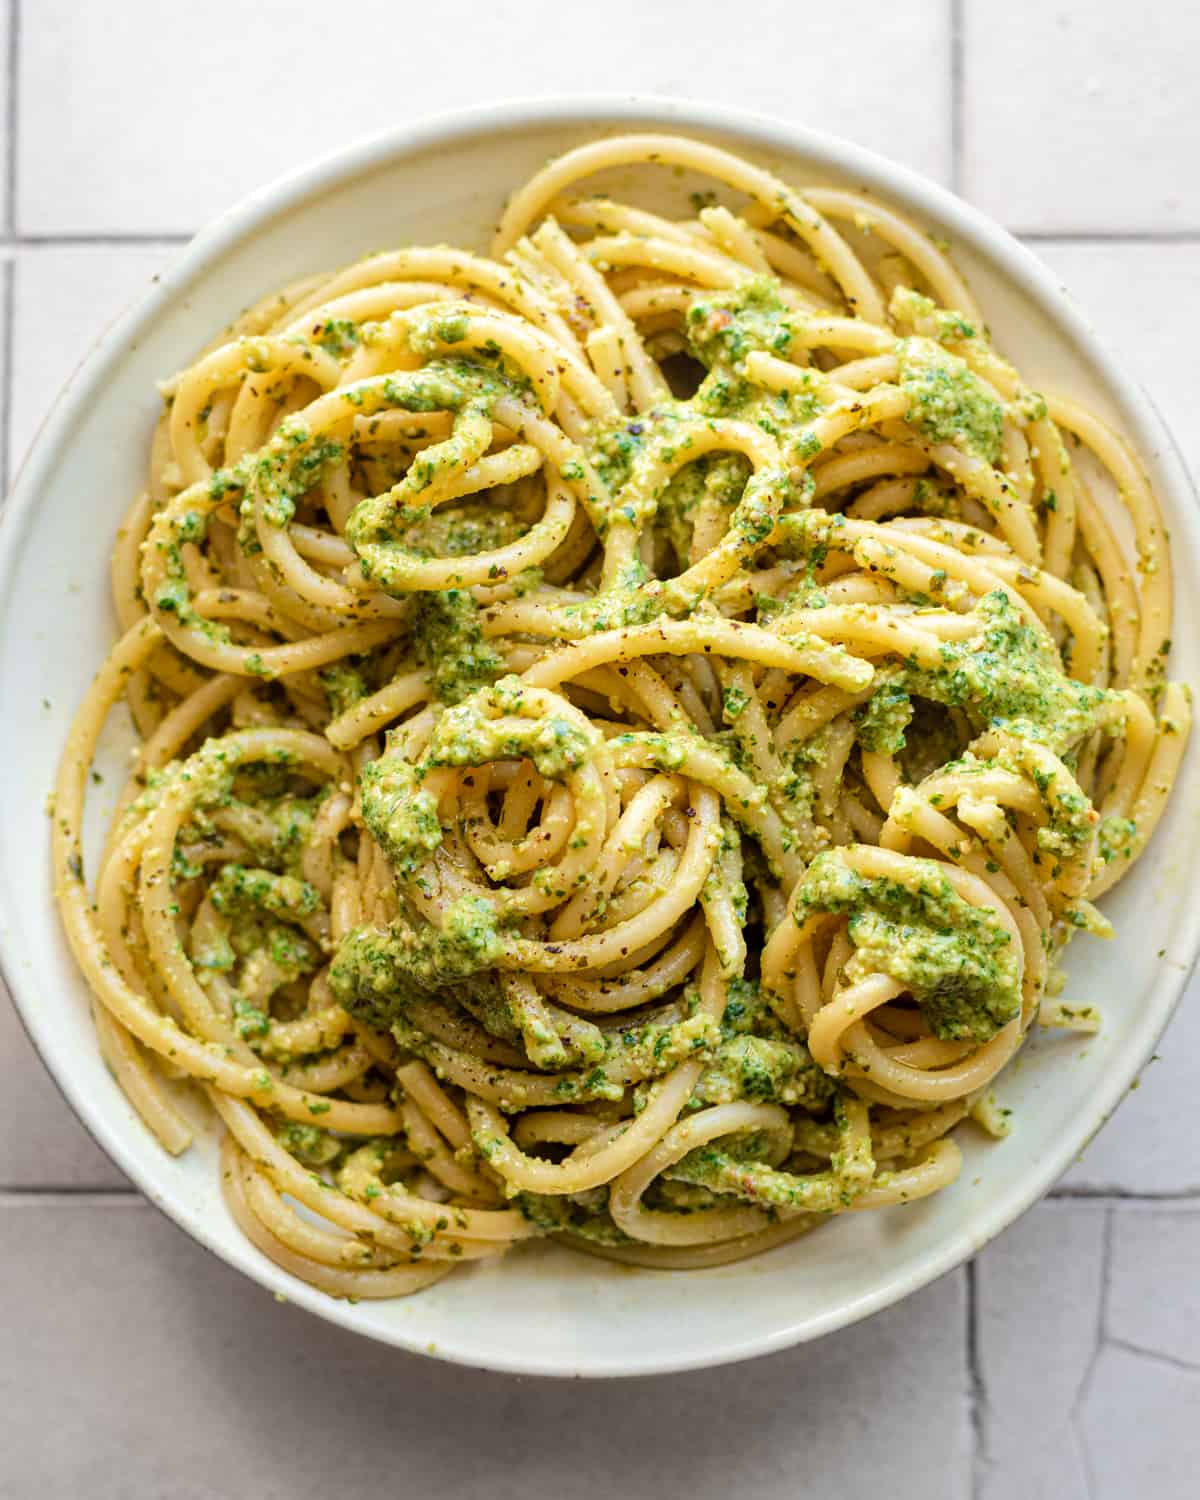 Overhead view of pesto covered spaghetti on a white plate.